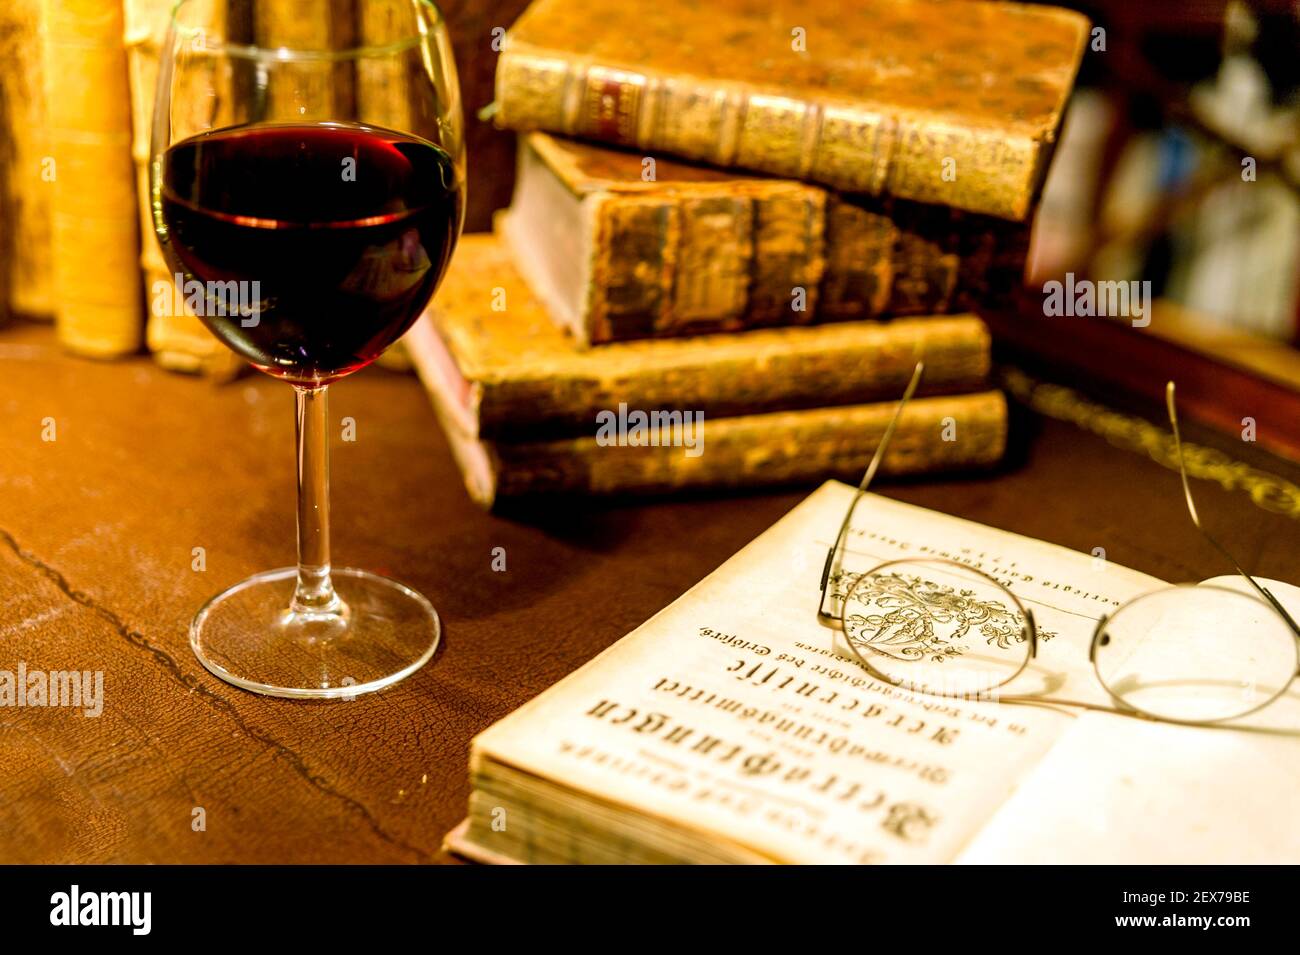 Old books and a glass of wine Stock Photo